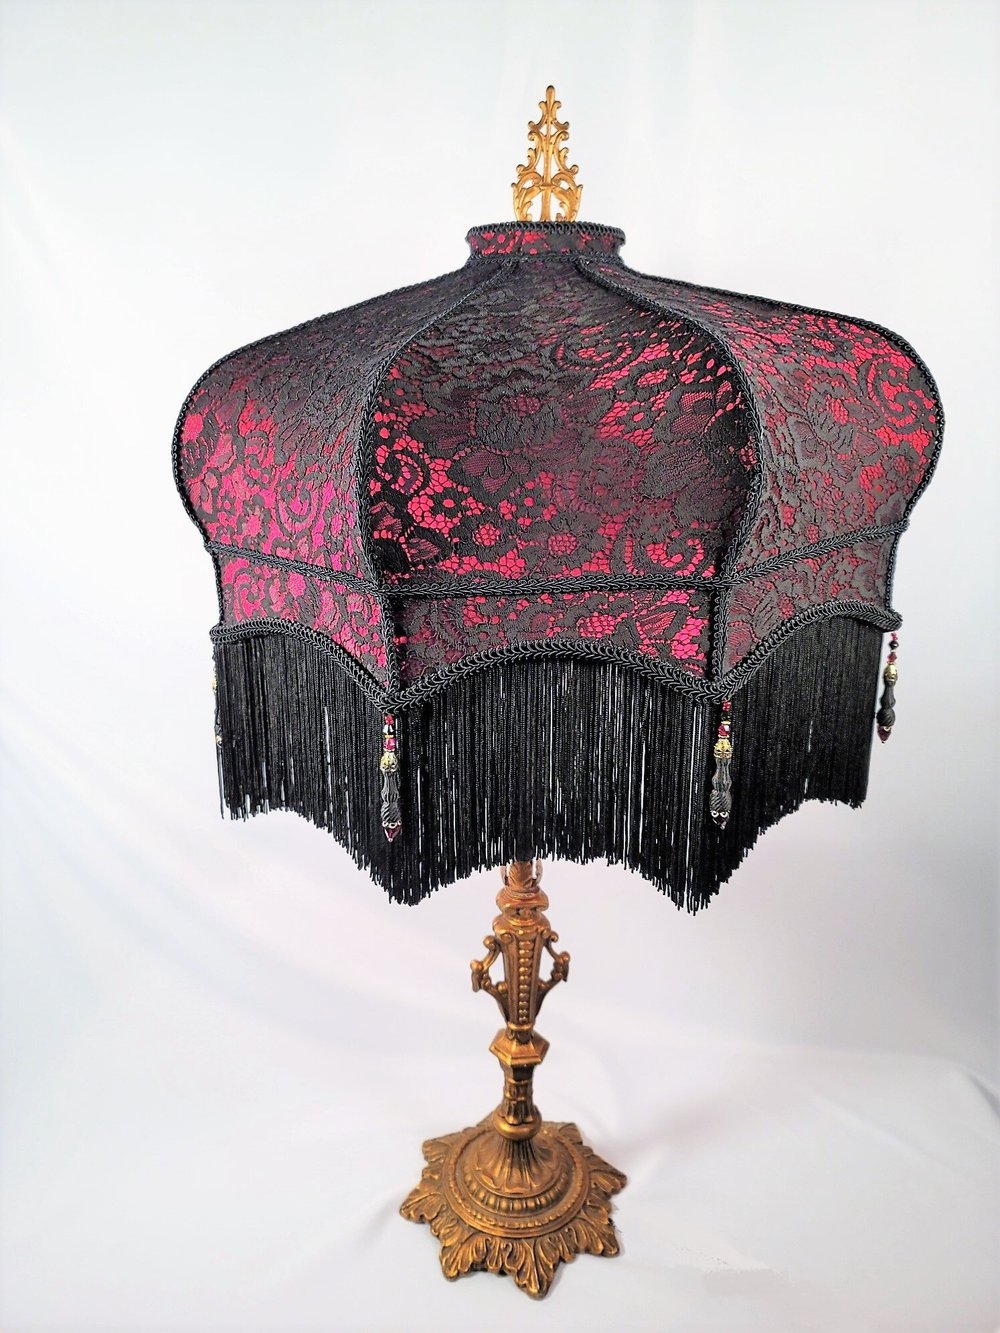 Elegance Lamps Antique & Handcrafted Victorian Lampshades